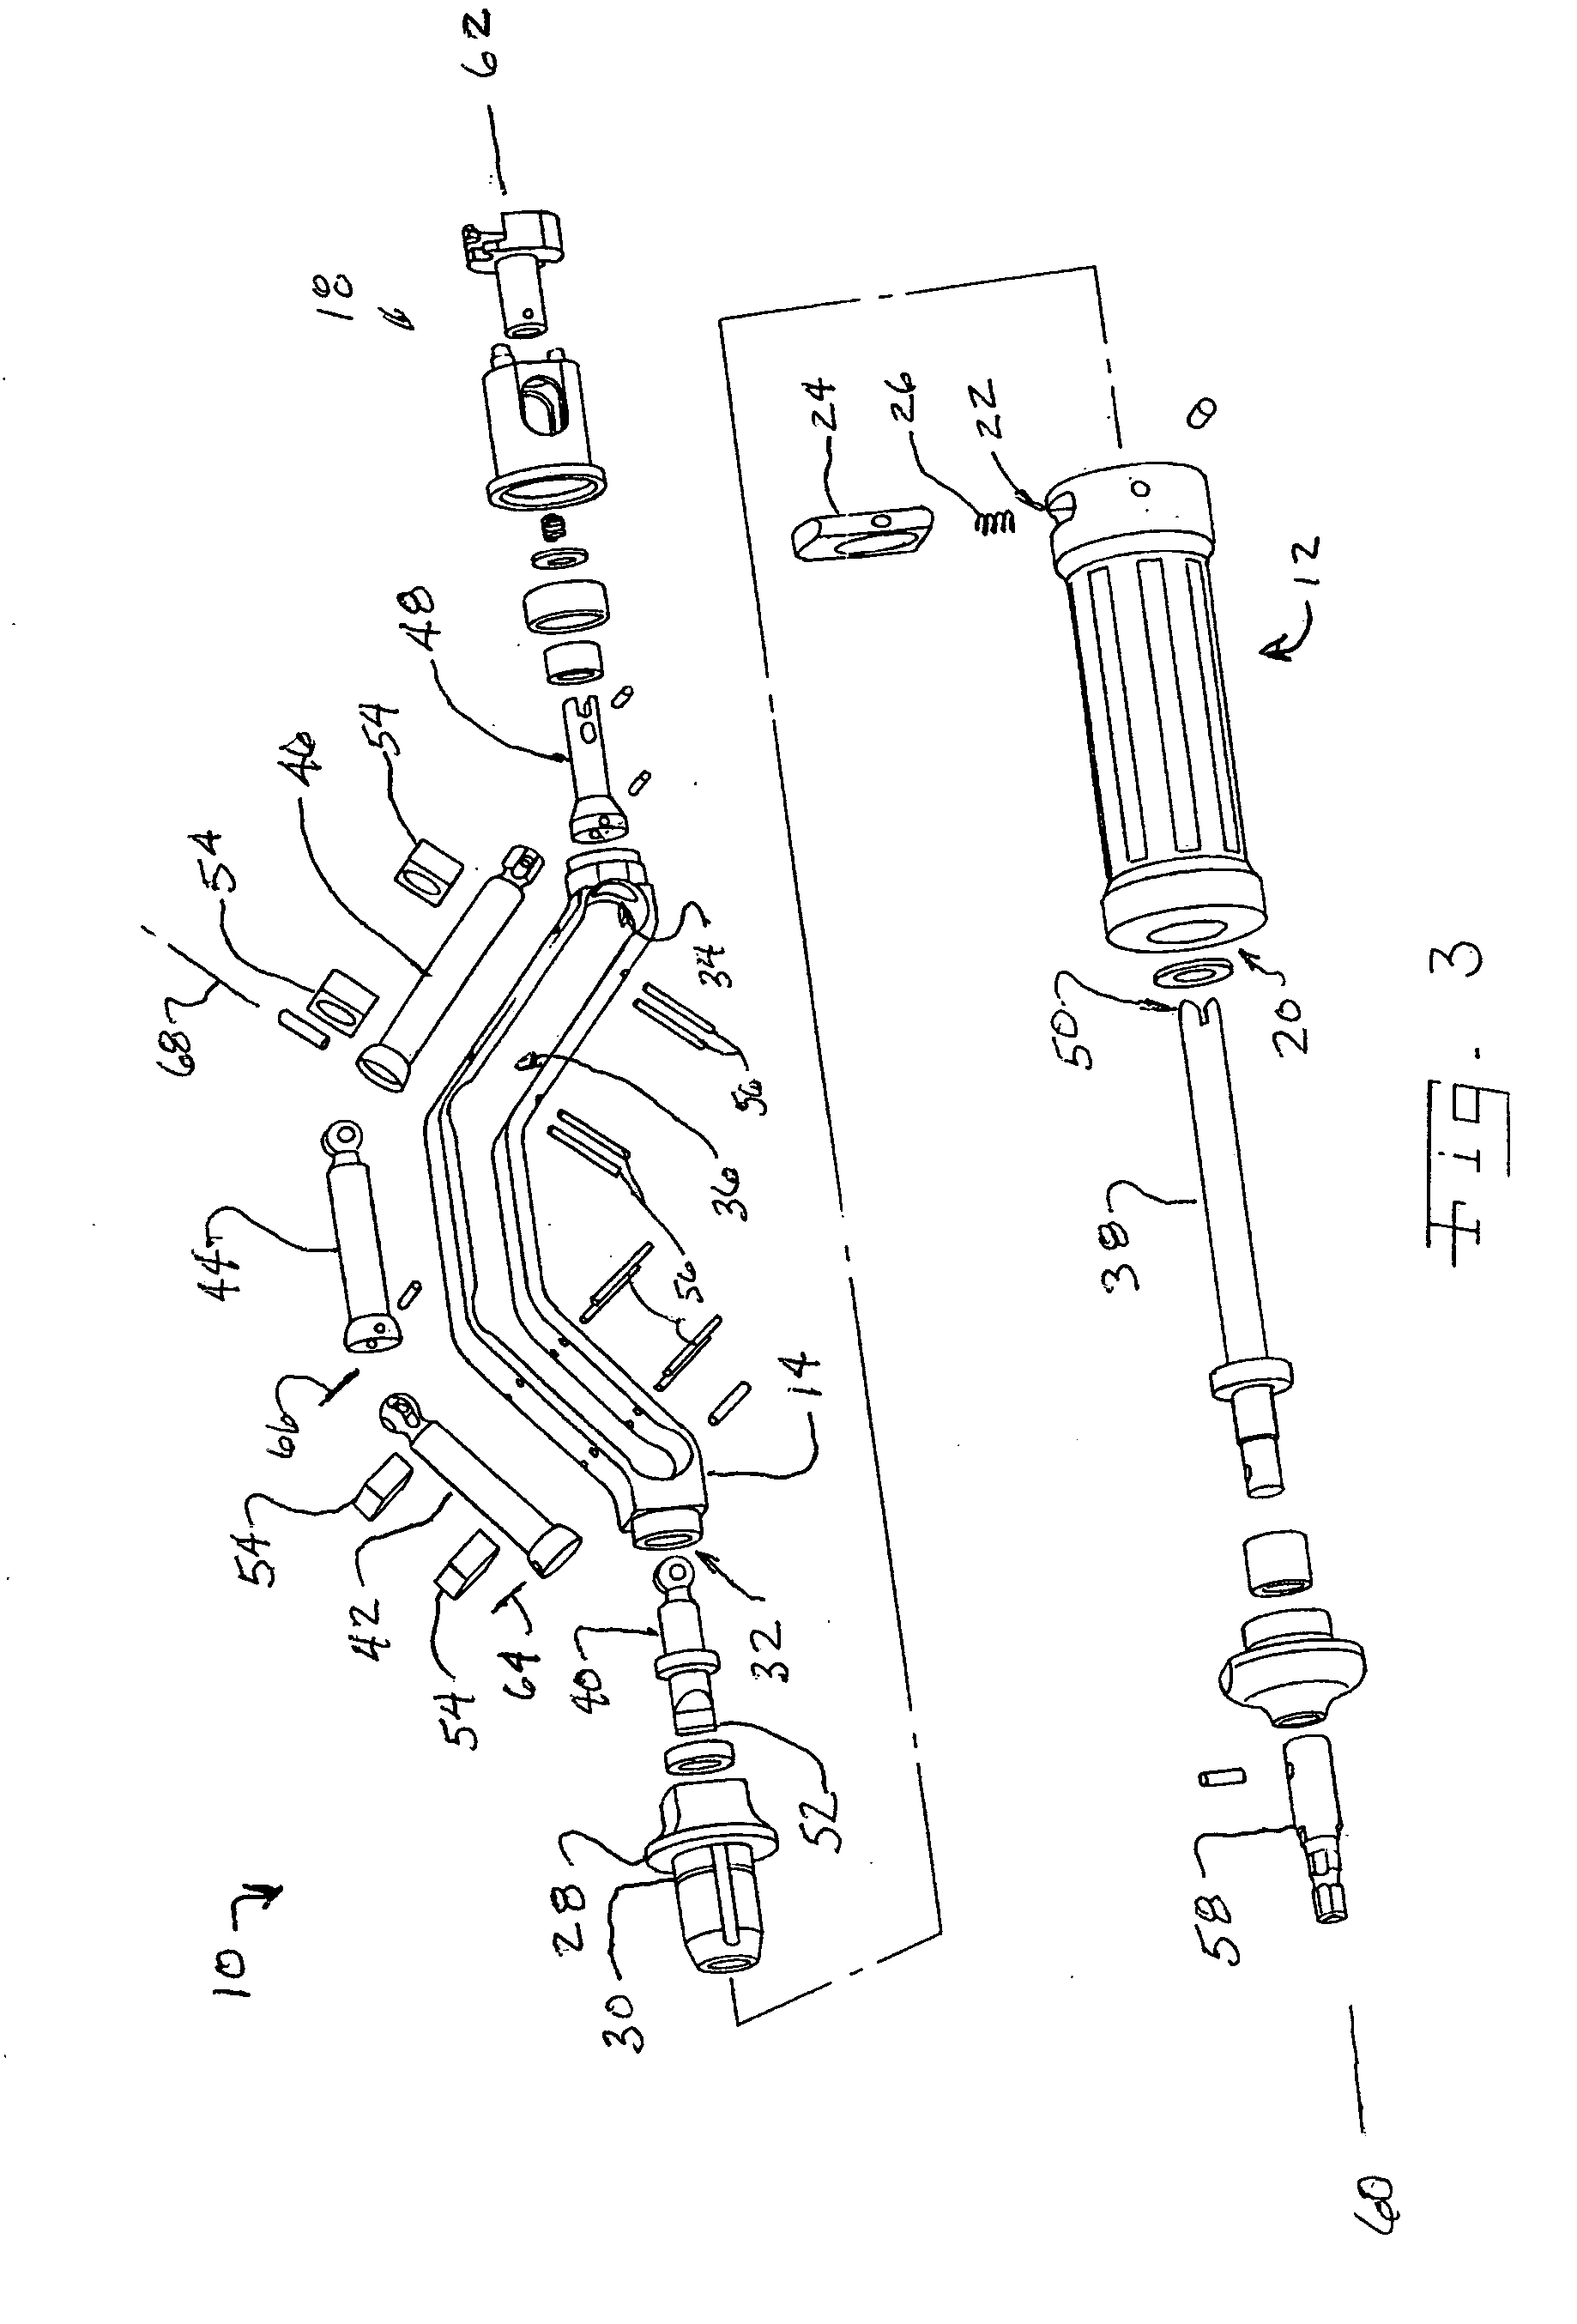 Minimally invasive surgical driver